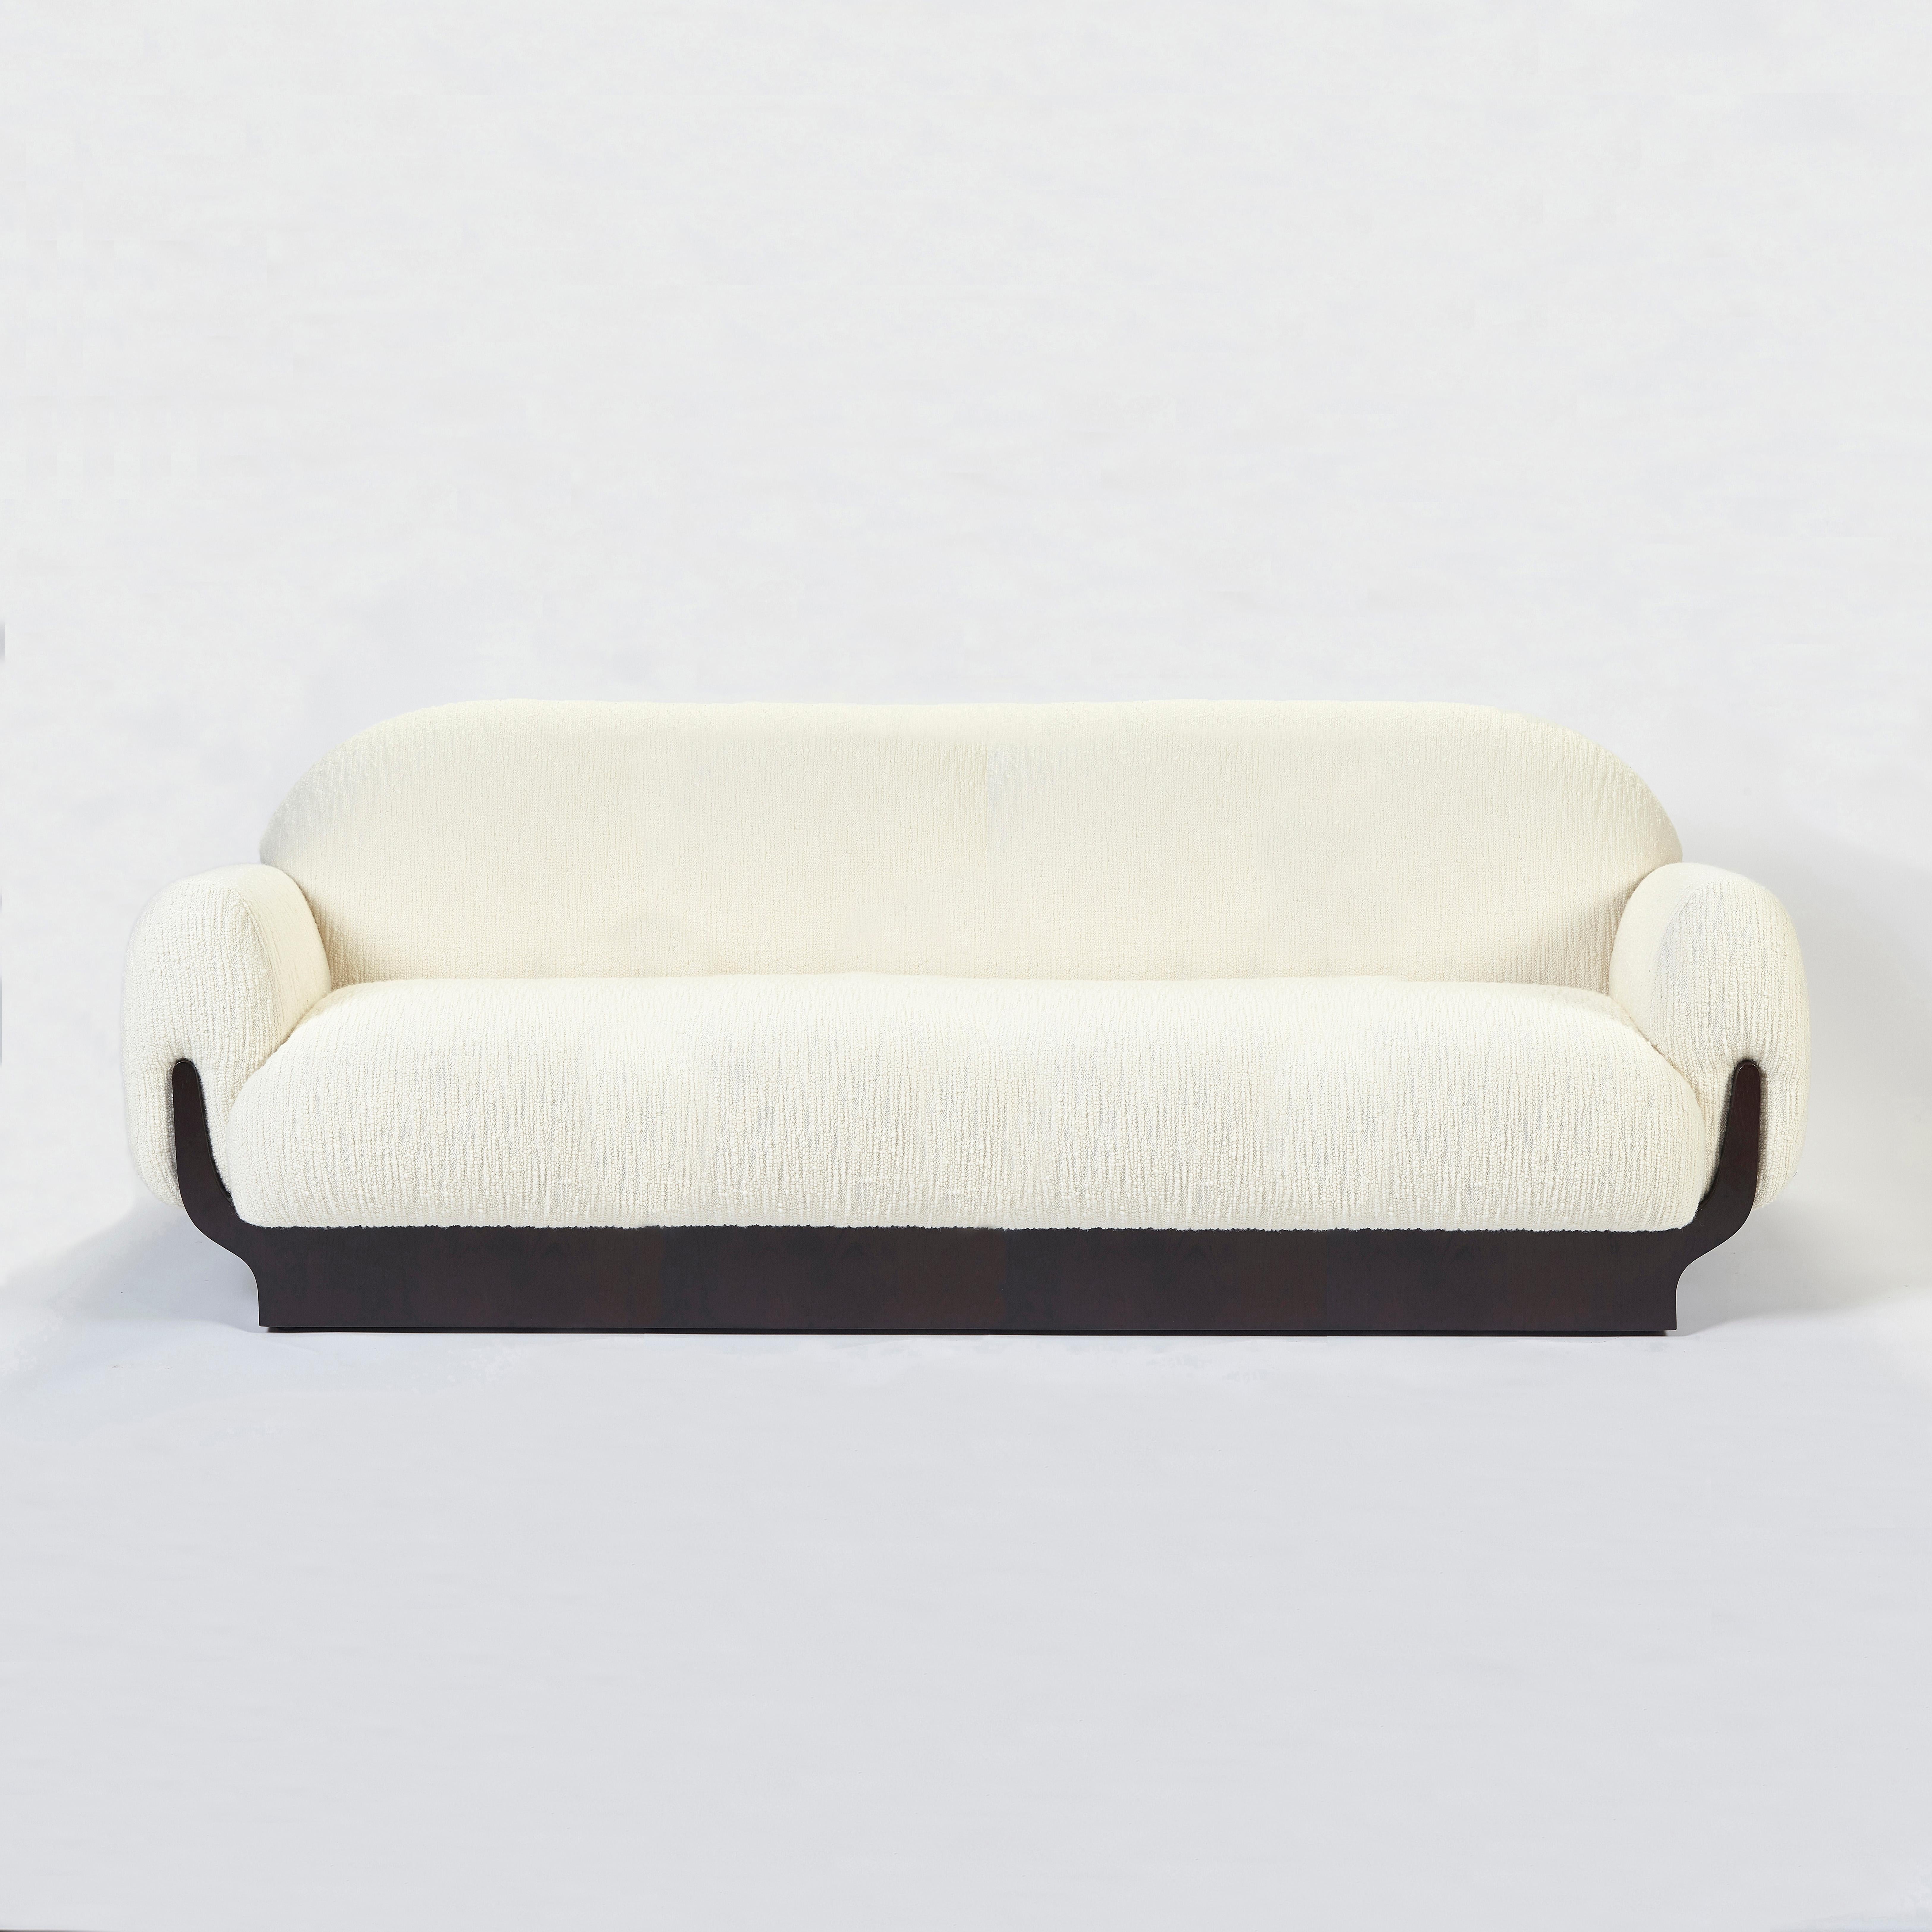 Copacabana Sofa, in Darkened Oak, by Duistt

With a bohemian look, the Copacabana sofa is the perfect blend of unique style and cosy comfort. Inspired by the sidewalks of Rio de Janeiro, most recognized for their mosaic artistry, the copacabana sofa